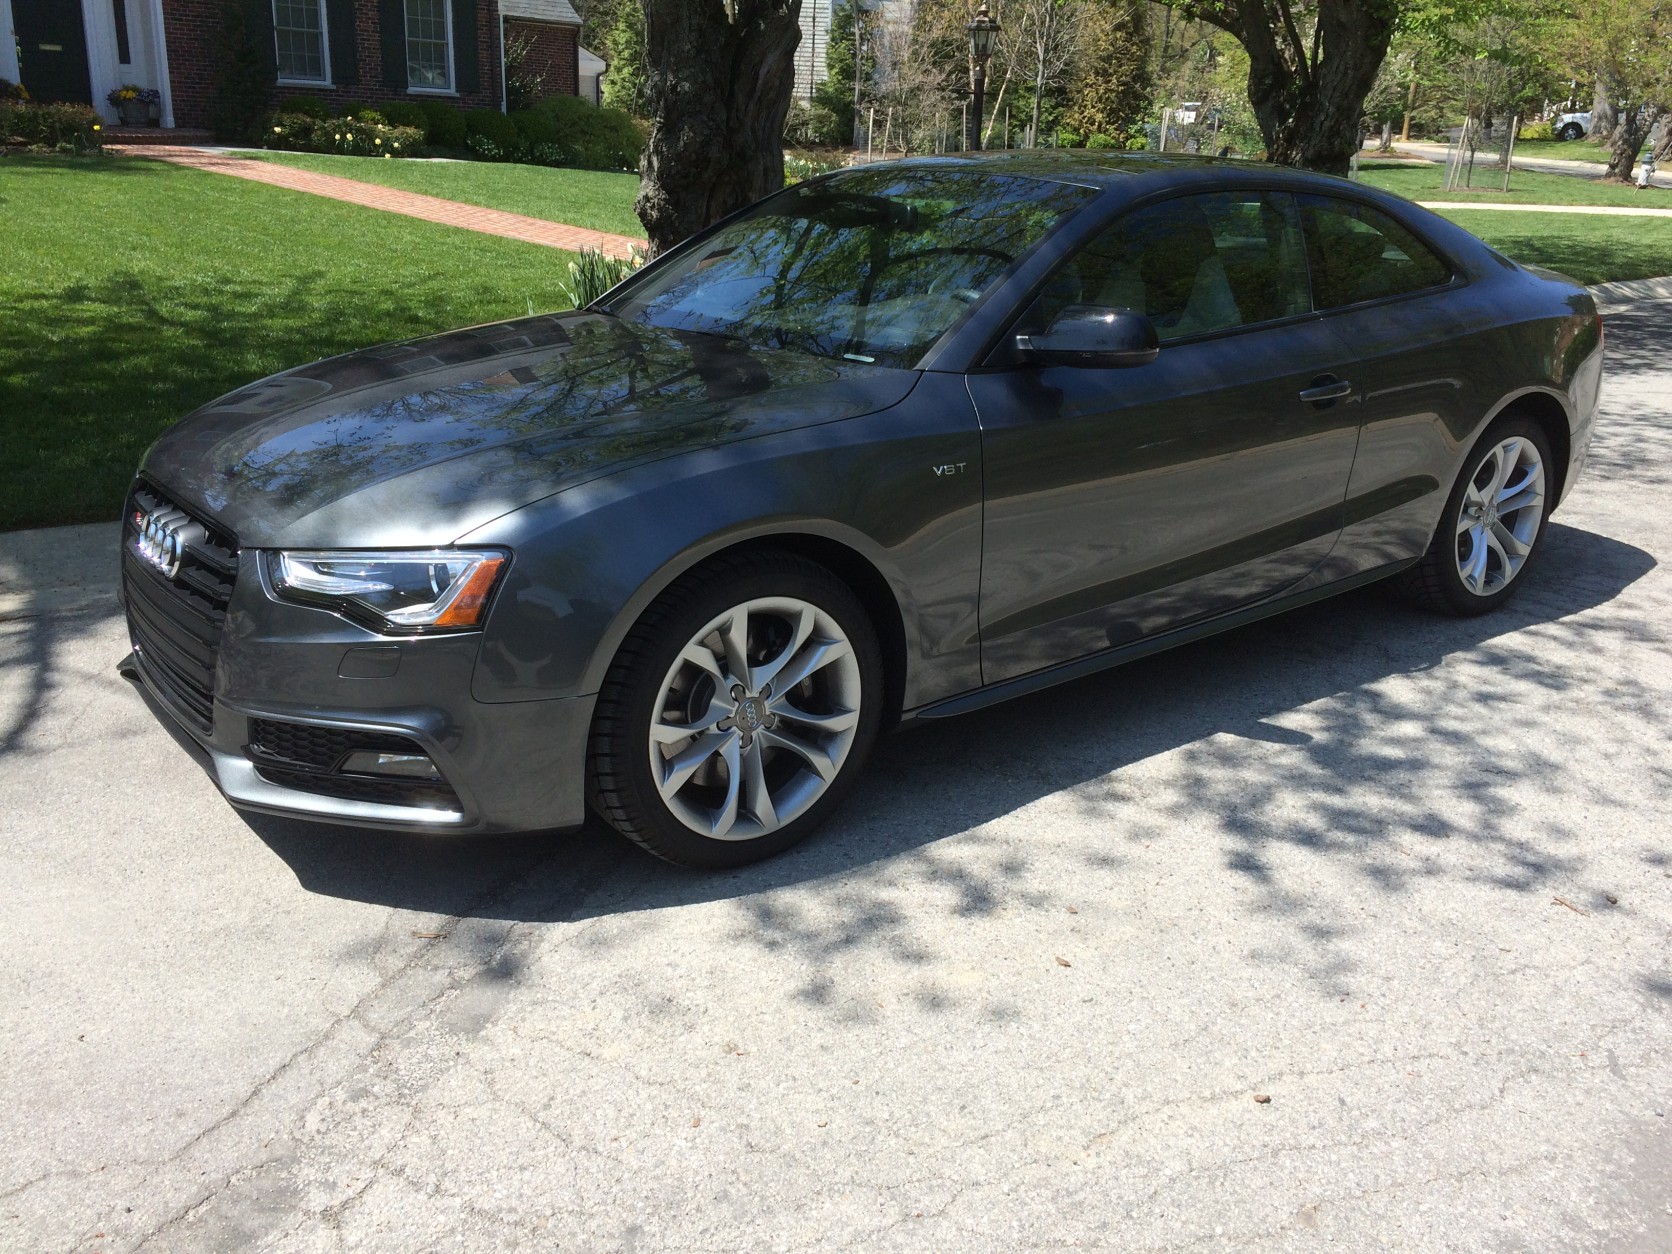 Audi has been making the A5/S5 coupe for nearly nine years now and it still looks great on the road. (WTOP/Mike Parris)